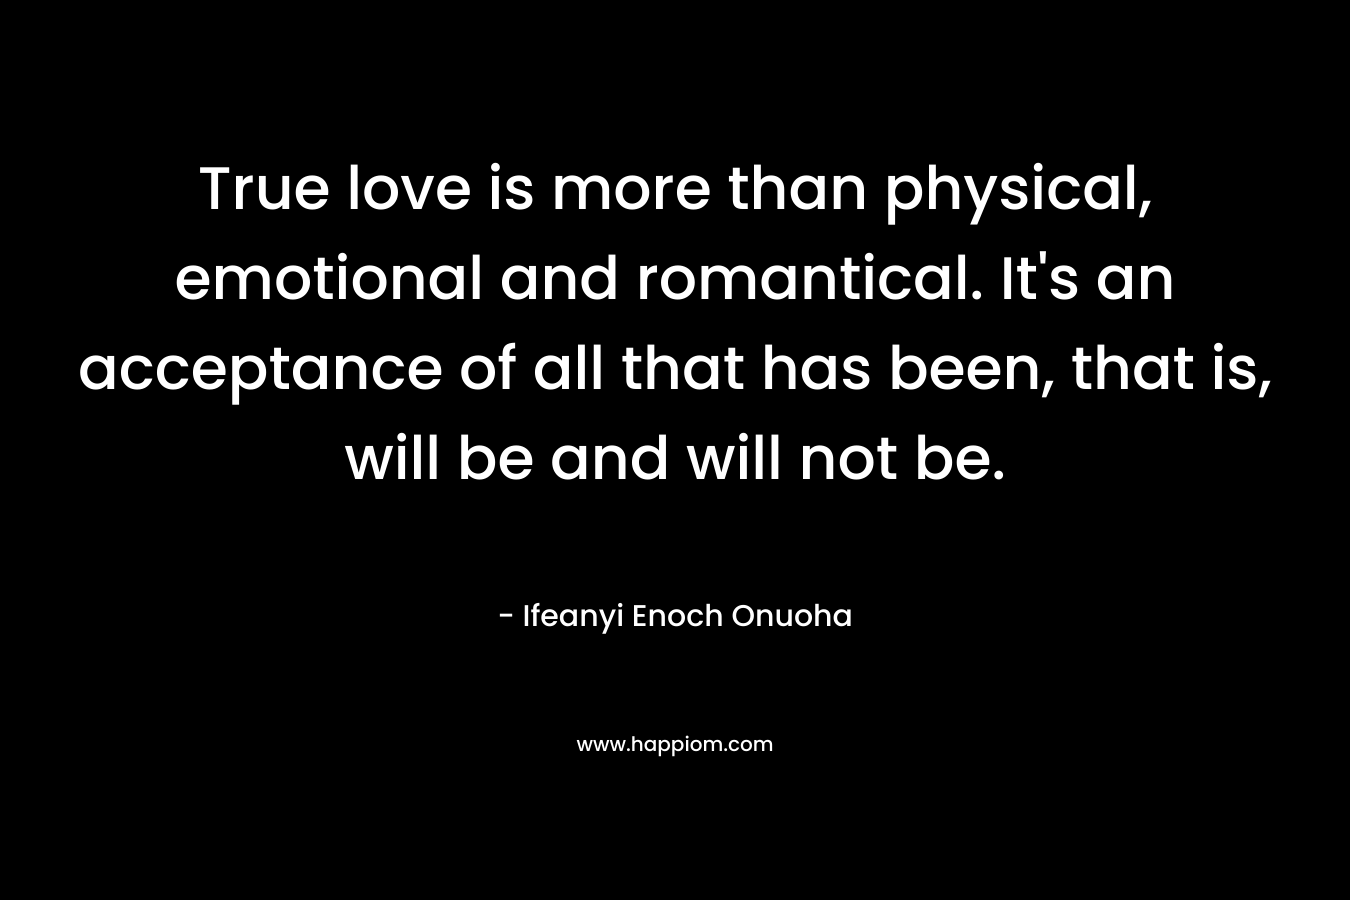 True love is more than physical, emotional and romantical. It's an acceptance of all that has been, that is, will be and will not be.